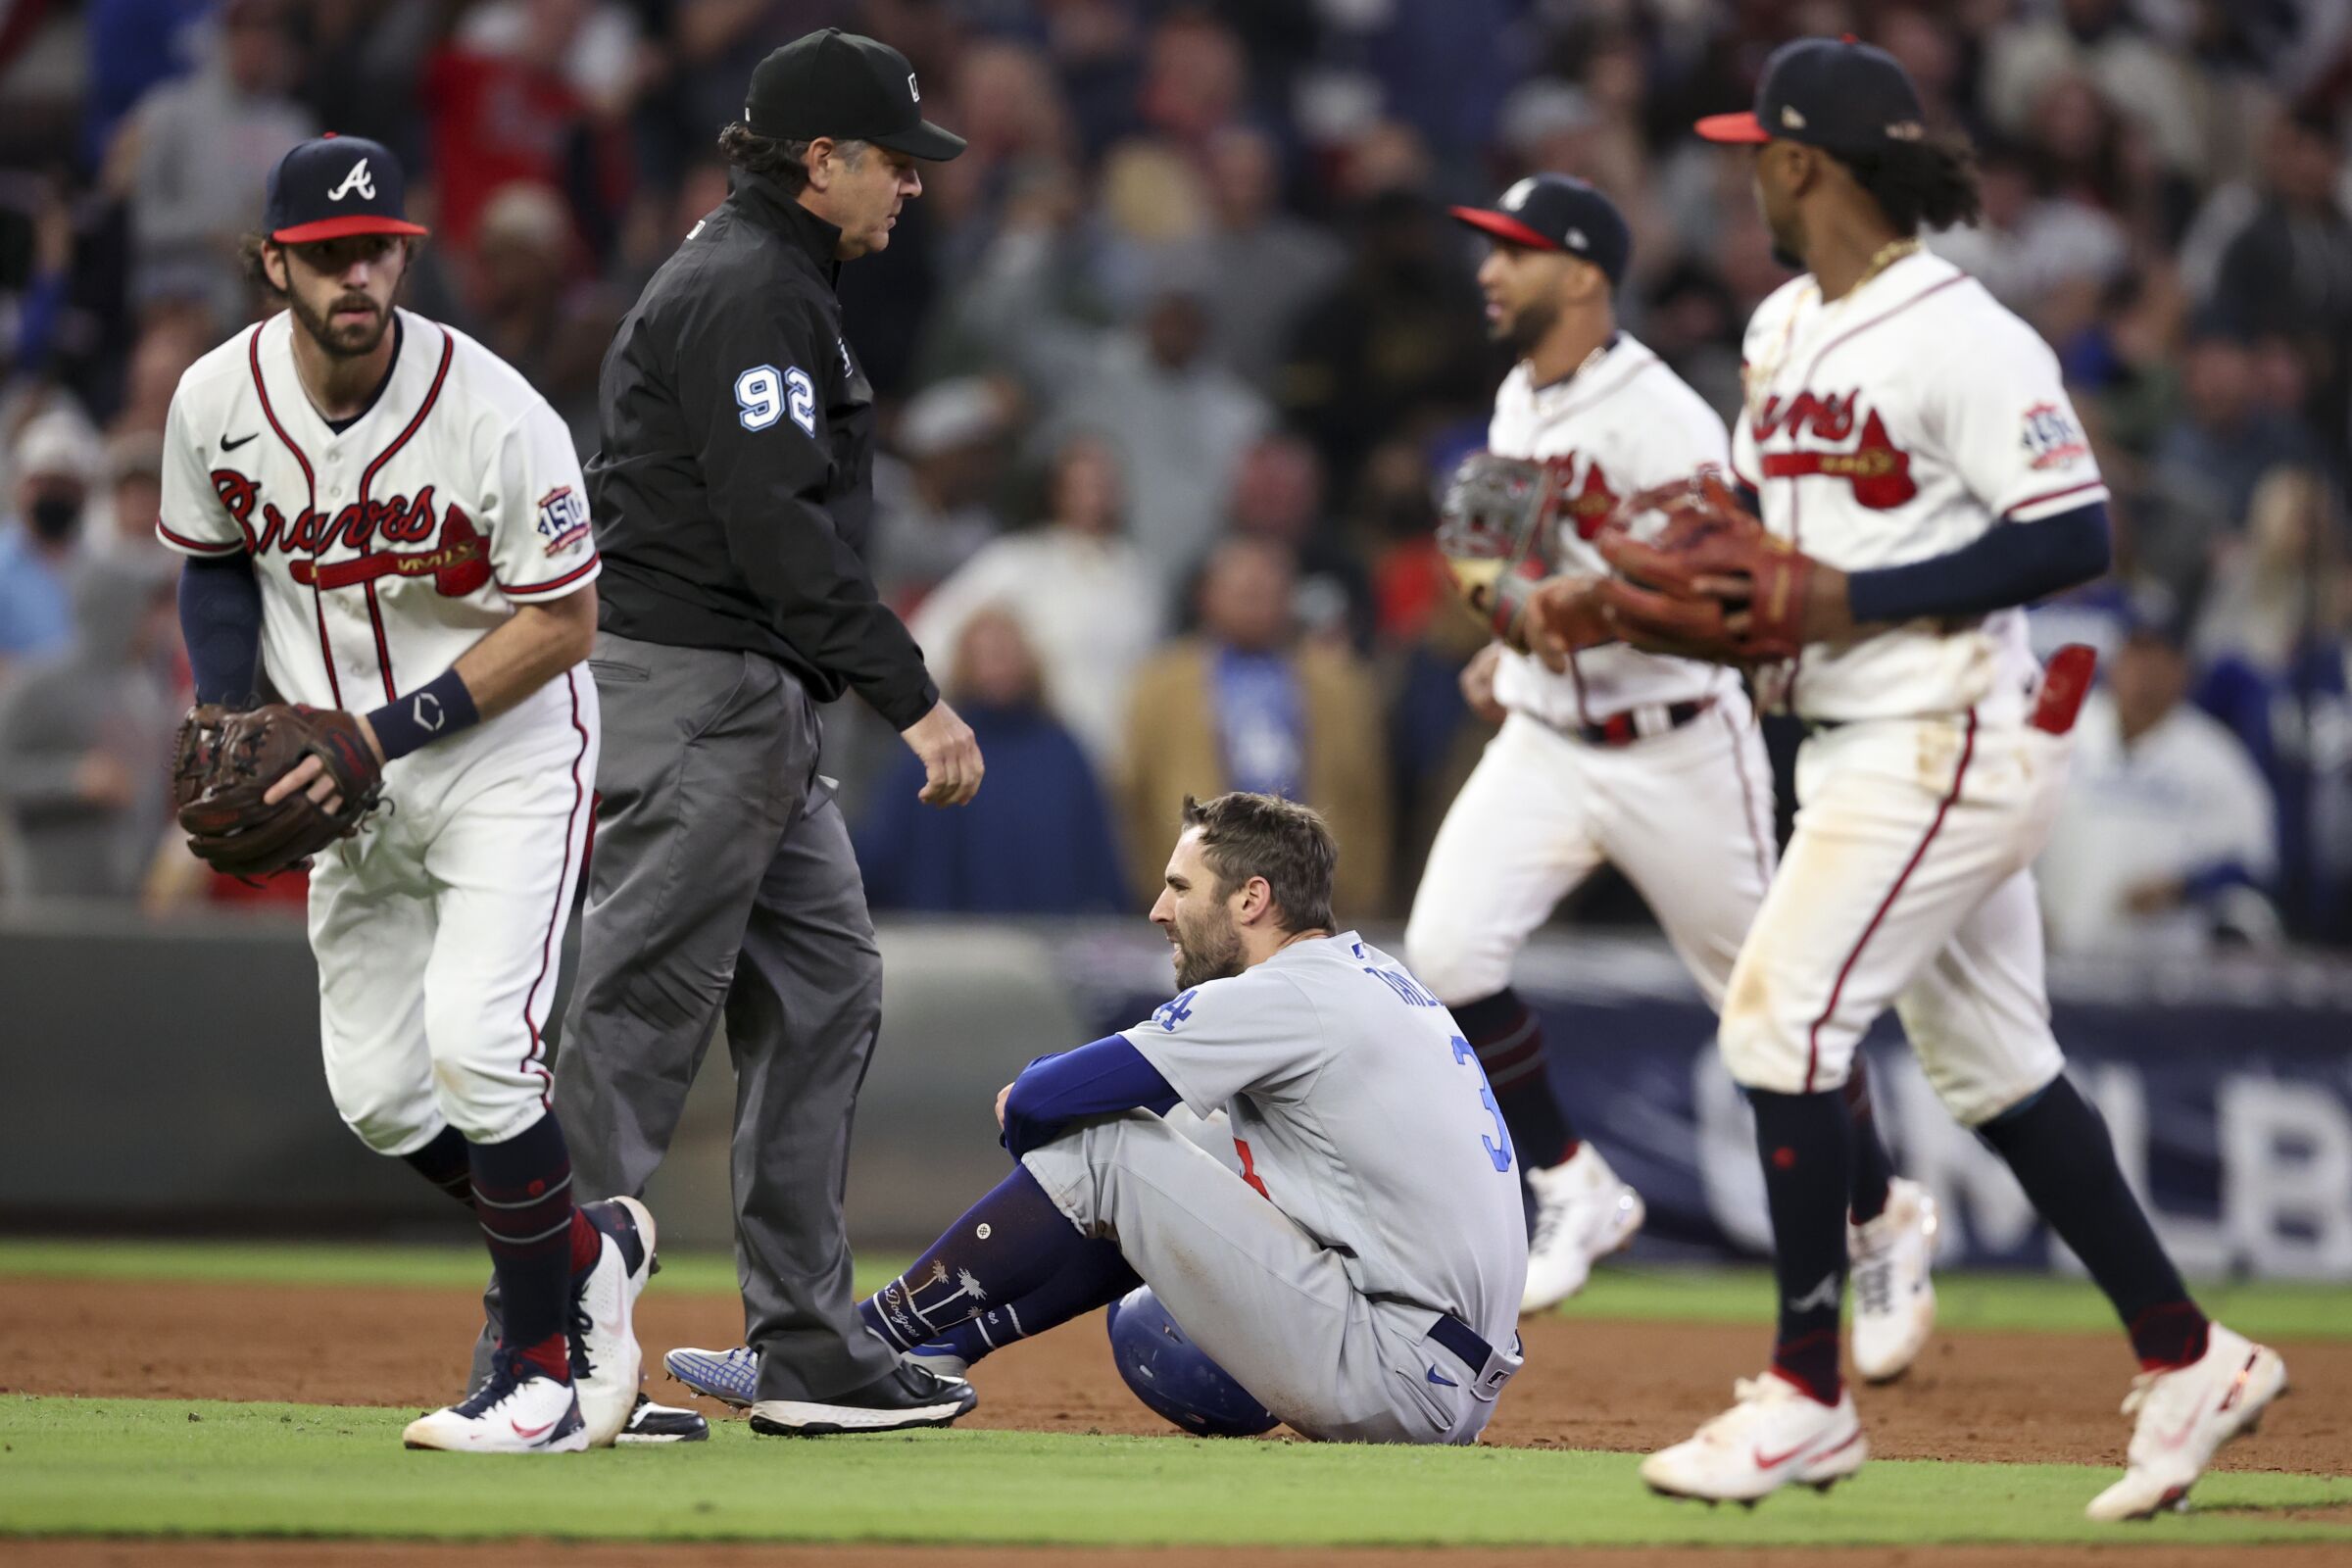 The Dodgers' Chris Taylor sits on the field while Braves players pass him